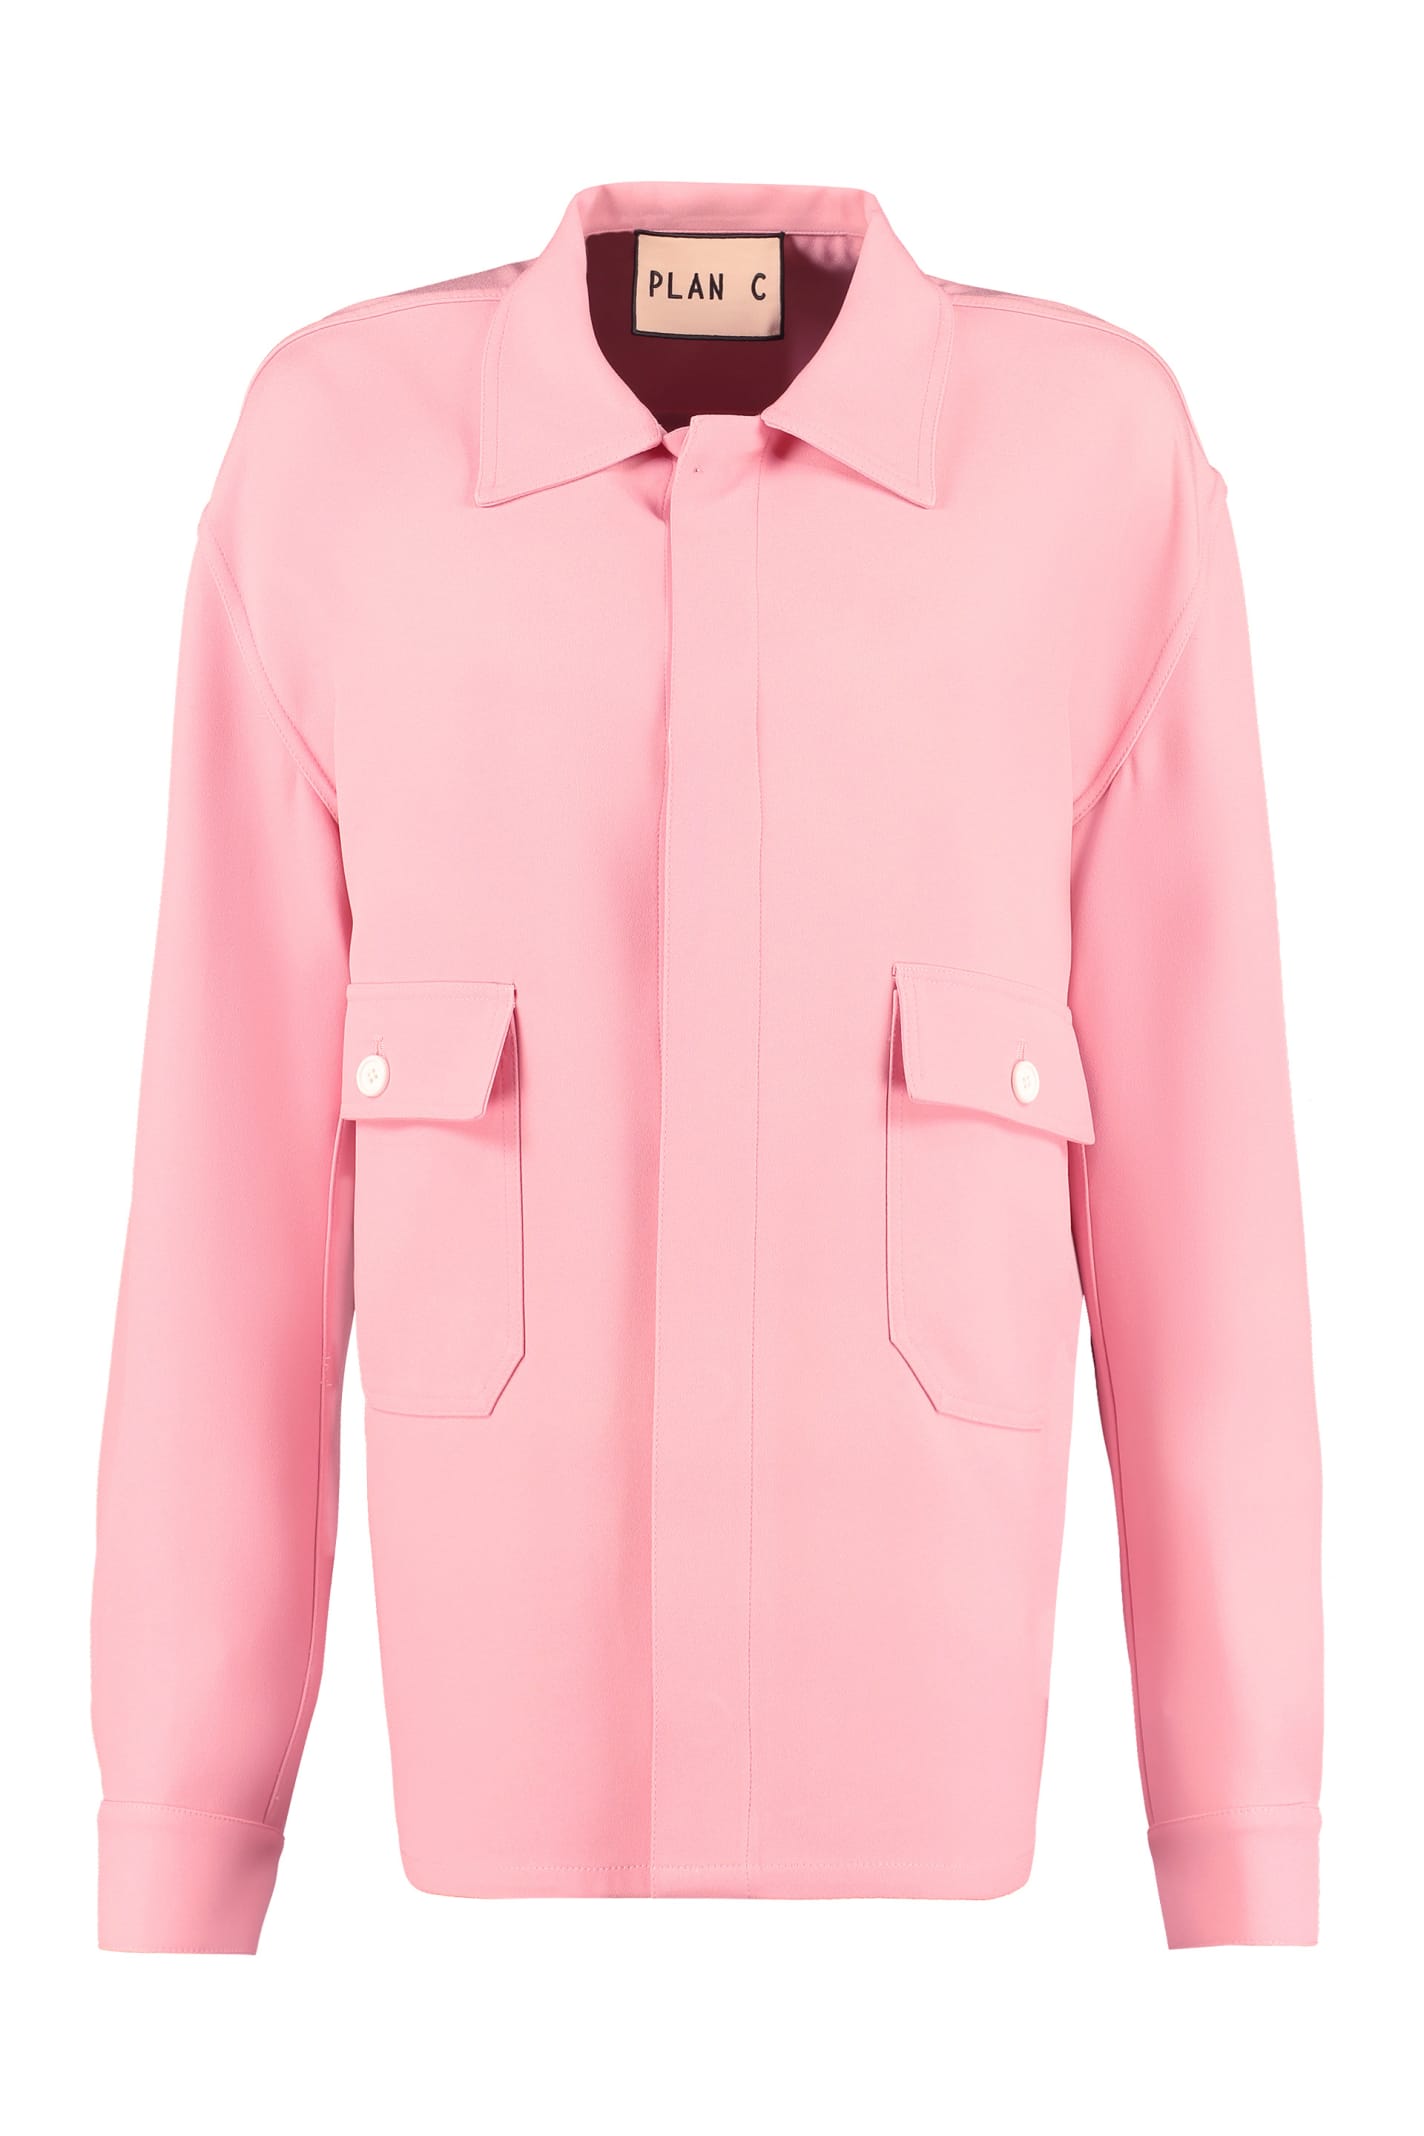 Plan C Buttoned Jacket